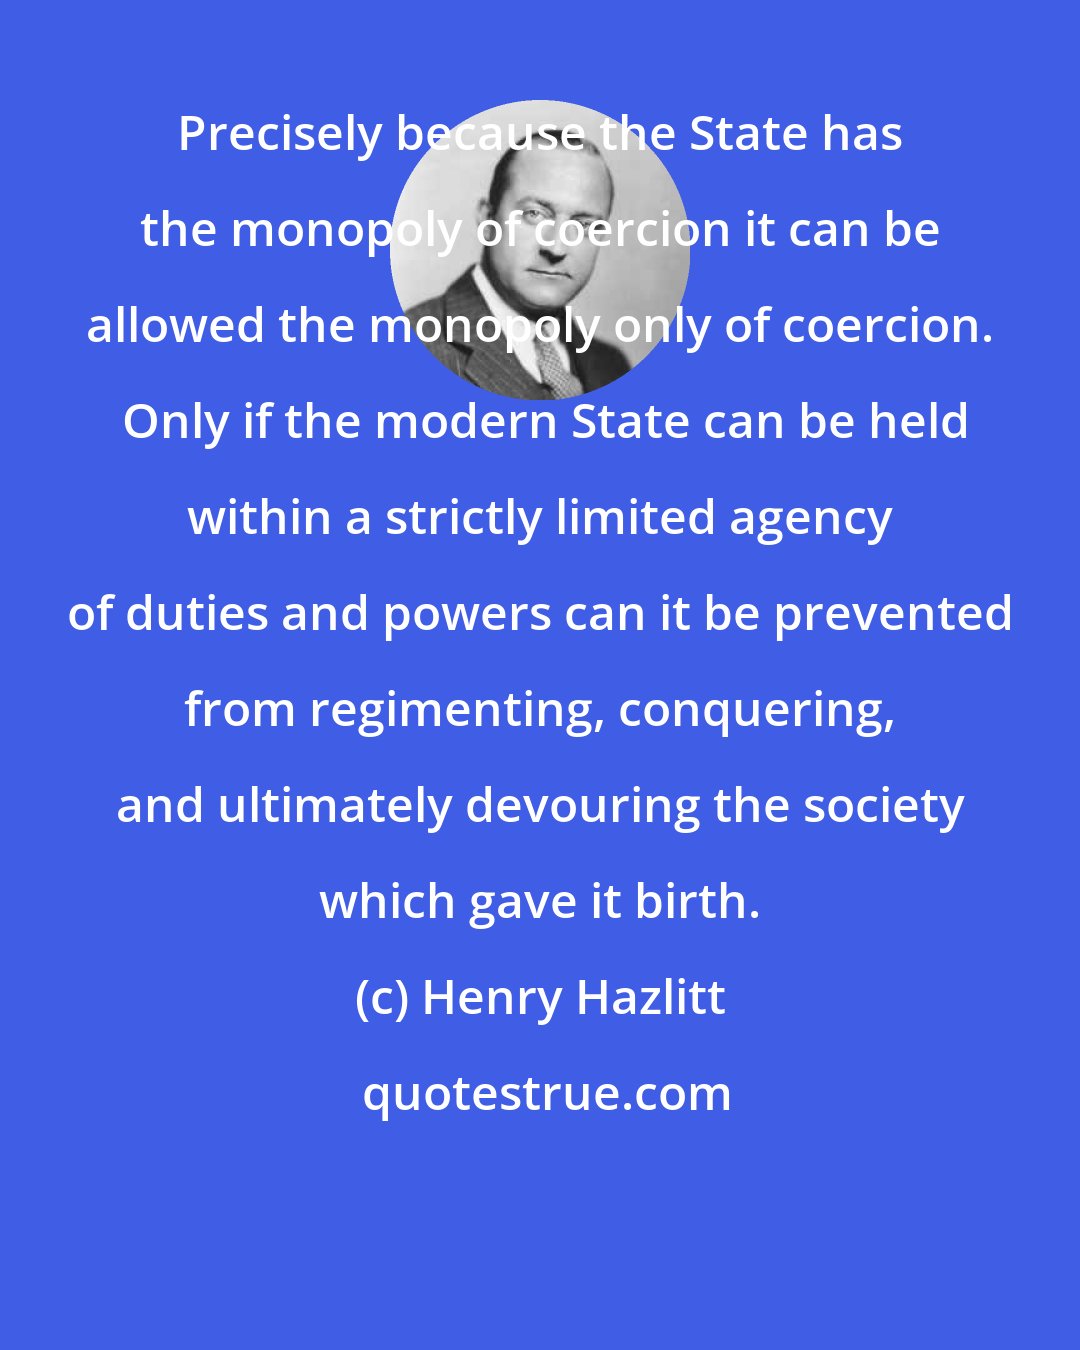 Henry Hazlitt: Precisely because the State has the monopoly of coercion it can be allowed the monopoly only of coercion.  Only if the modern State can be held within a strictly limited agency of duties and powers can it be prevented from regimenting, conquering, and ultimately devouring the society which gave it birth.